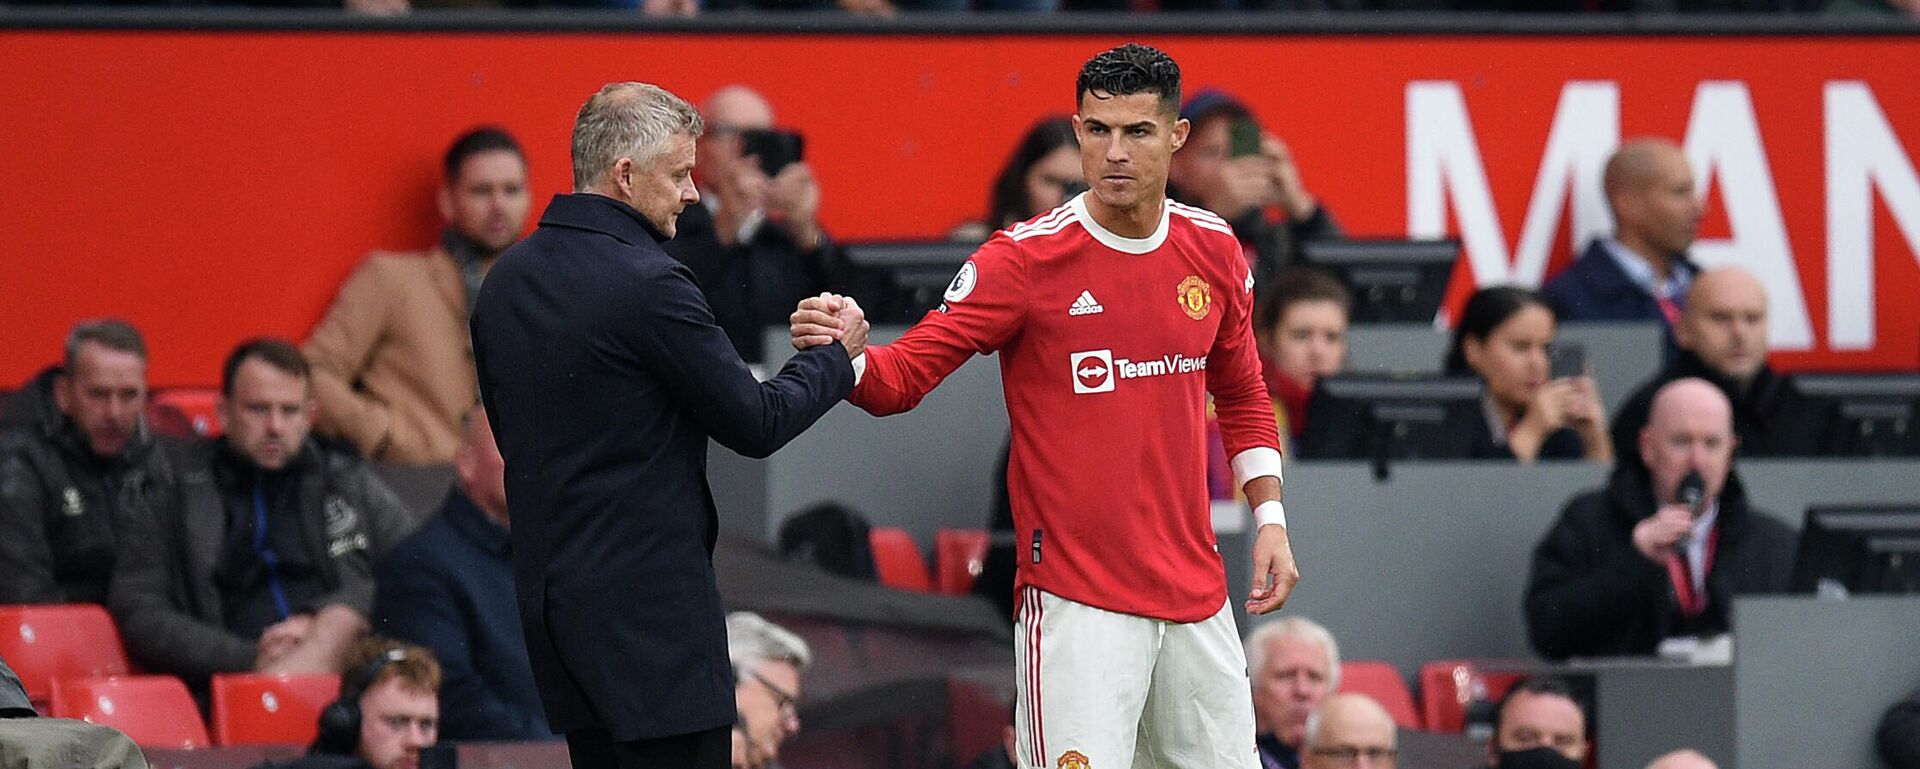 Manchester United's Norwegian manager Ole Gunnar Solskjaer (L) shakes hands with Manchester United's Portuguese striker Cristiano Ronaldo as he comes off the substitutes bench  during the English Premier League football match between Manchester United and Everton at Old Trafford in Manchester, north west England, on October 2, 2021. - Sputnik International, 1920, 19.10.2021